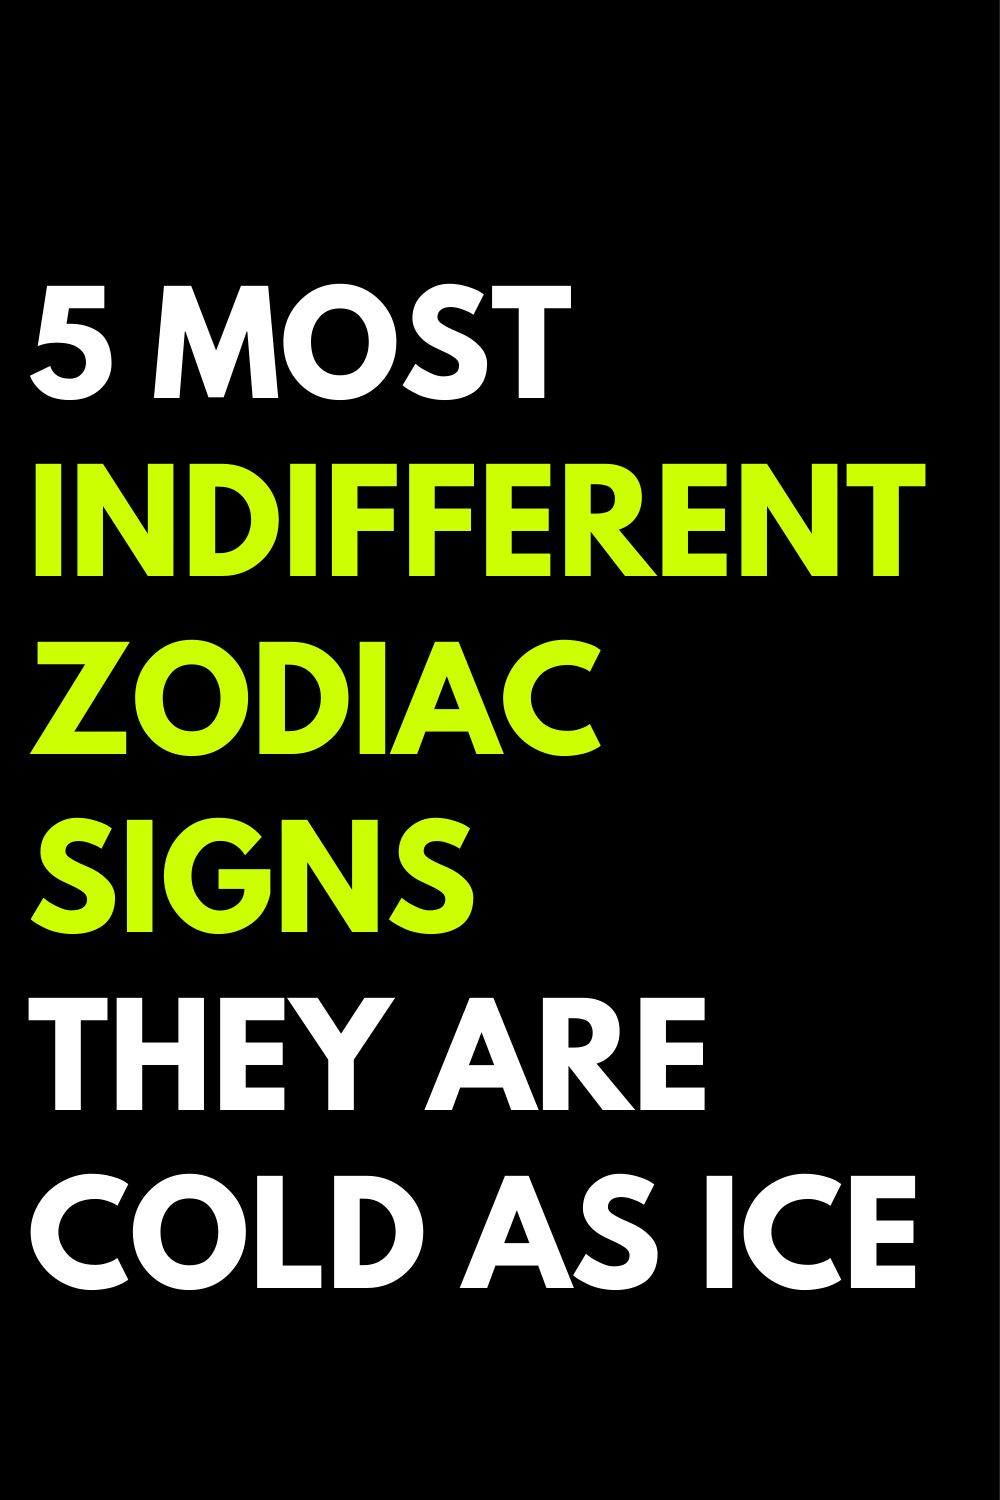 5 most indifferent zodiac signs - they are cold as ice